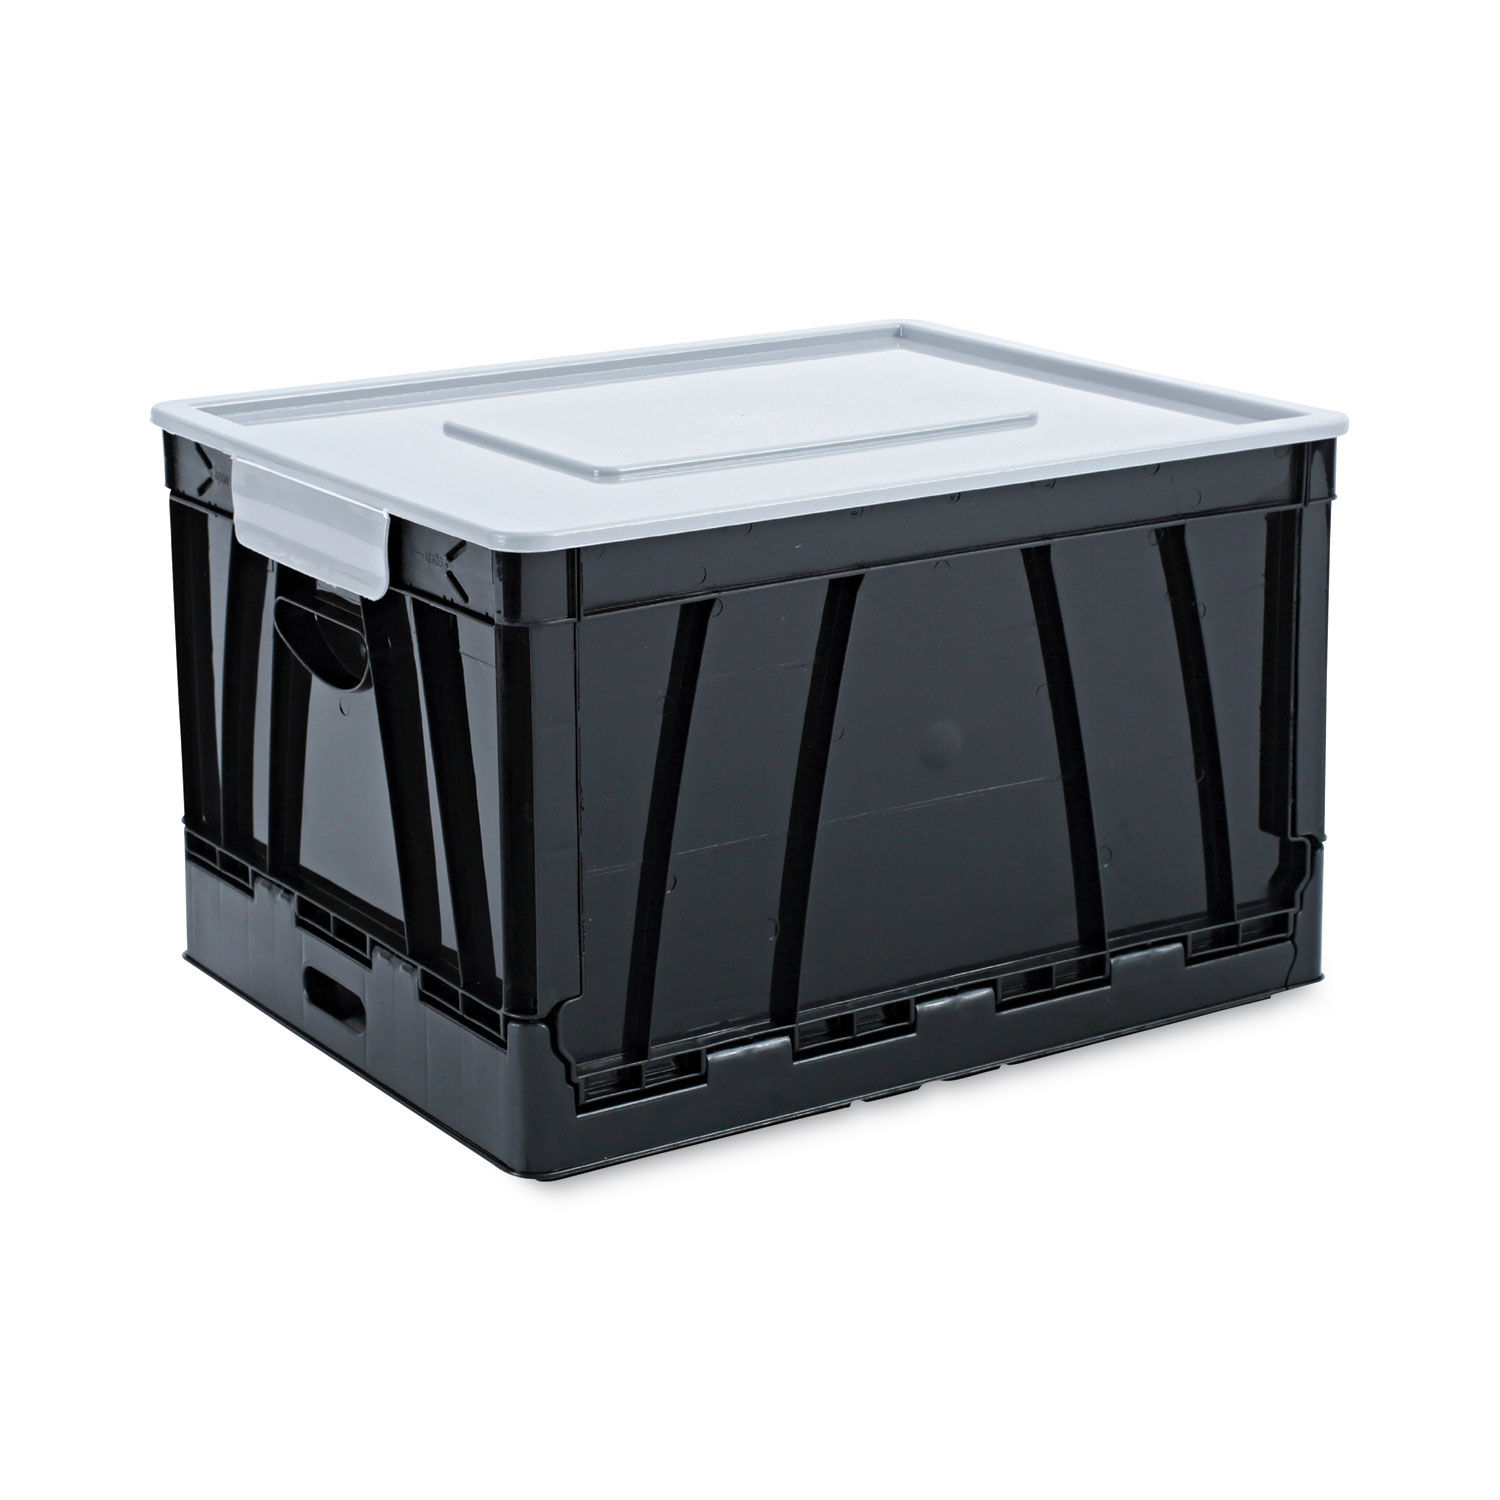 Collapsible Crate by Universalandreg; UNV40010